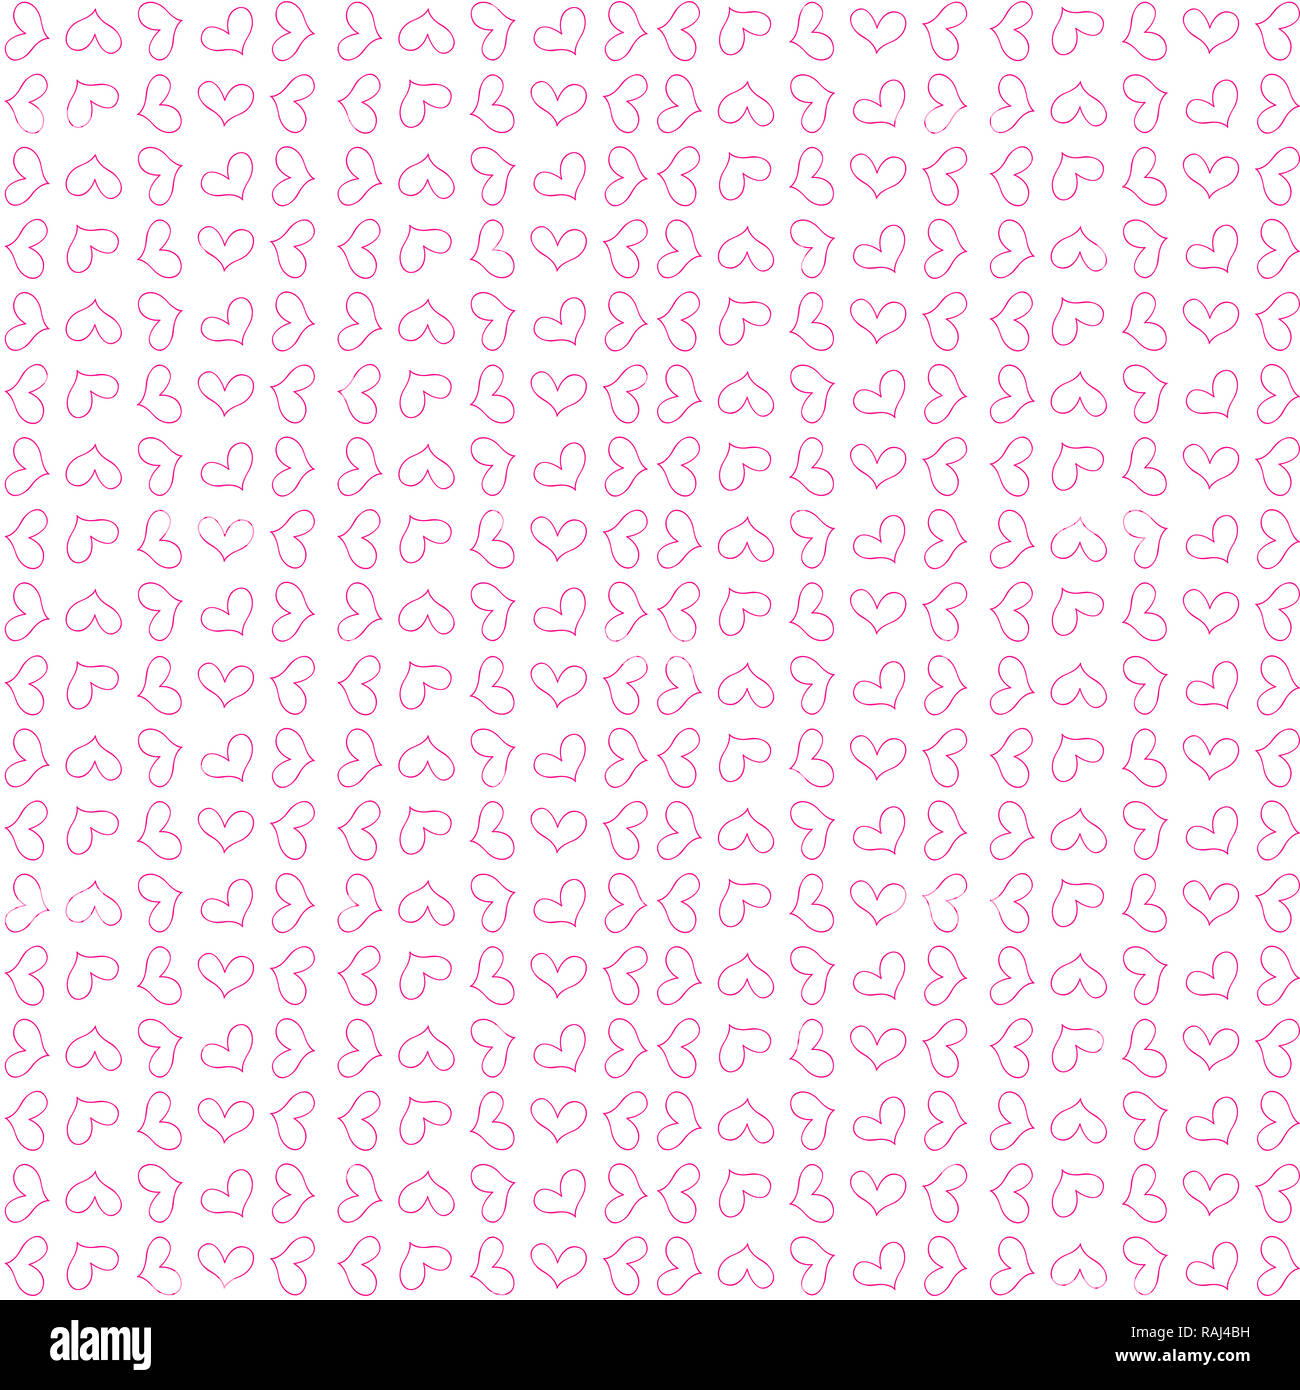 Seamless pink valentines background hearts vector pattern • wall